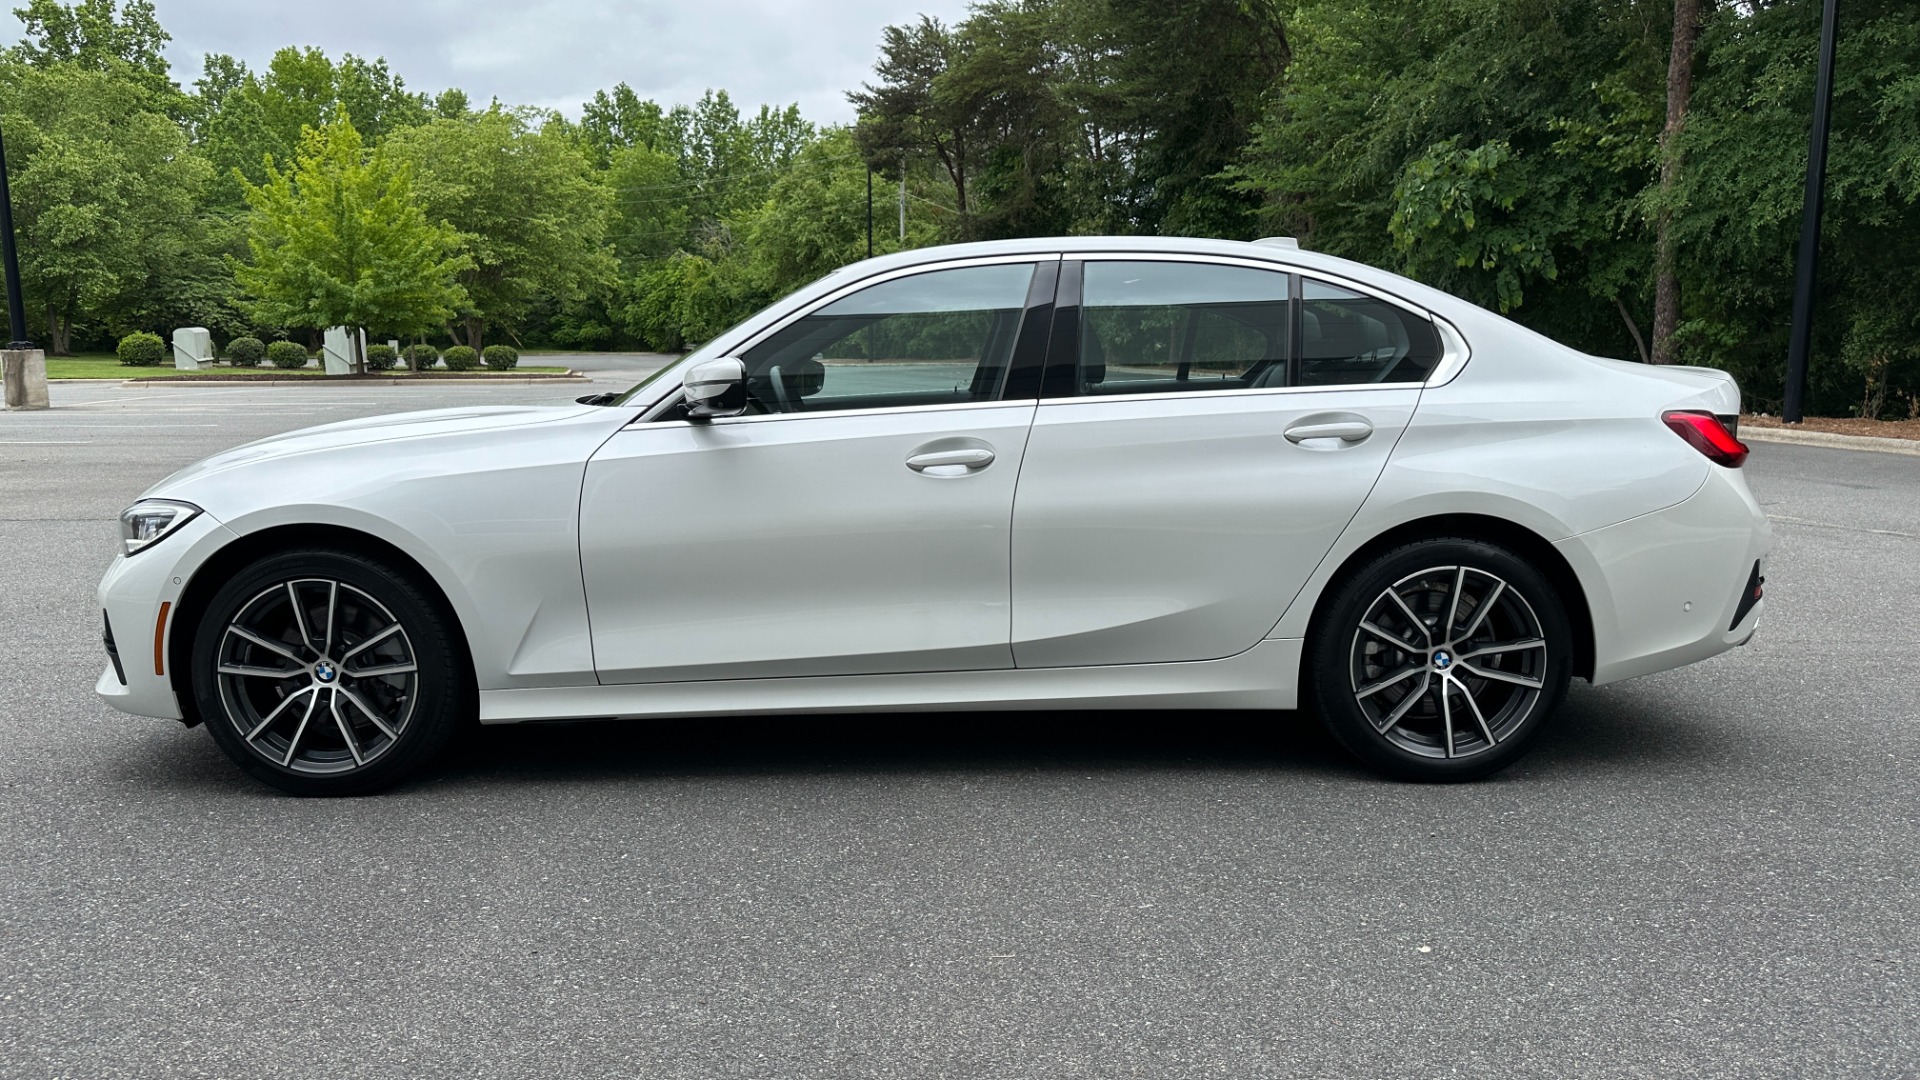 Used 2019 BMW 3 Series 330i xDrive / PREMIUM / LEATHER / EXECUTIVE / REMOTE START for sale $30,995 at Formula Imports in Charlotte NC 28227 3